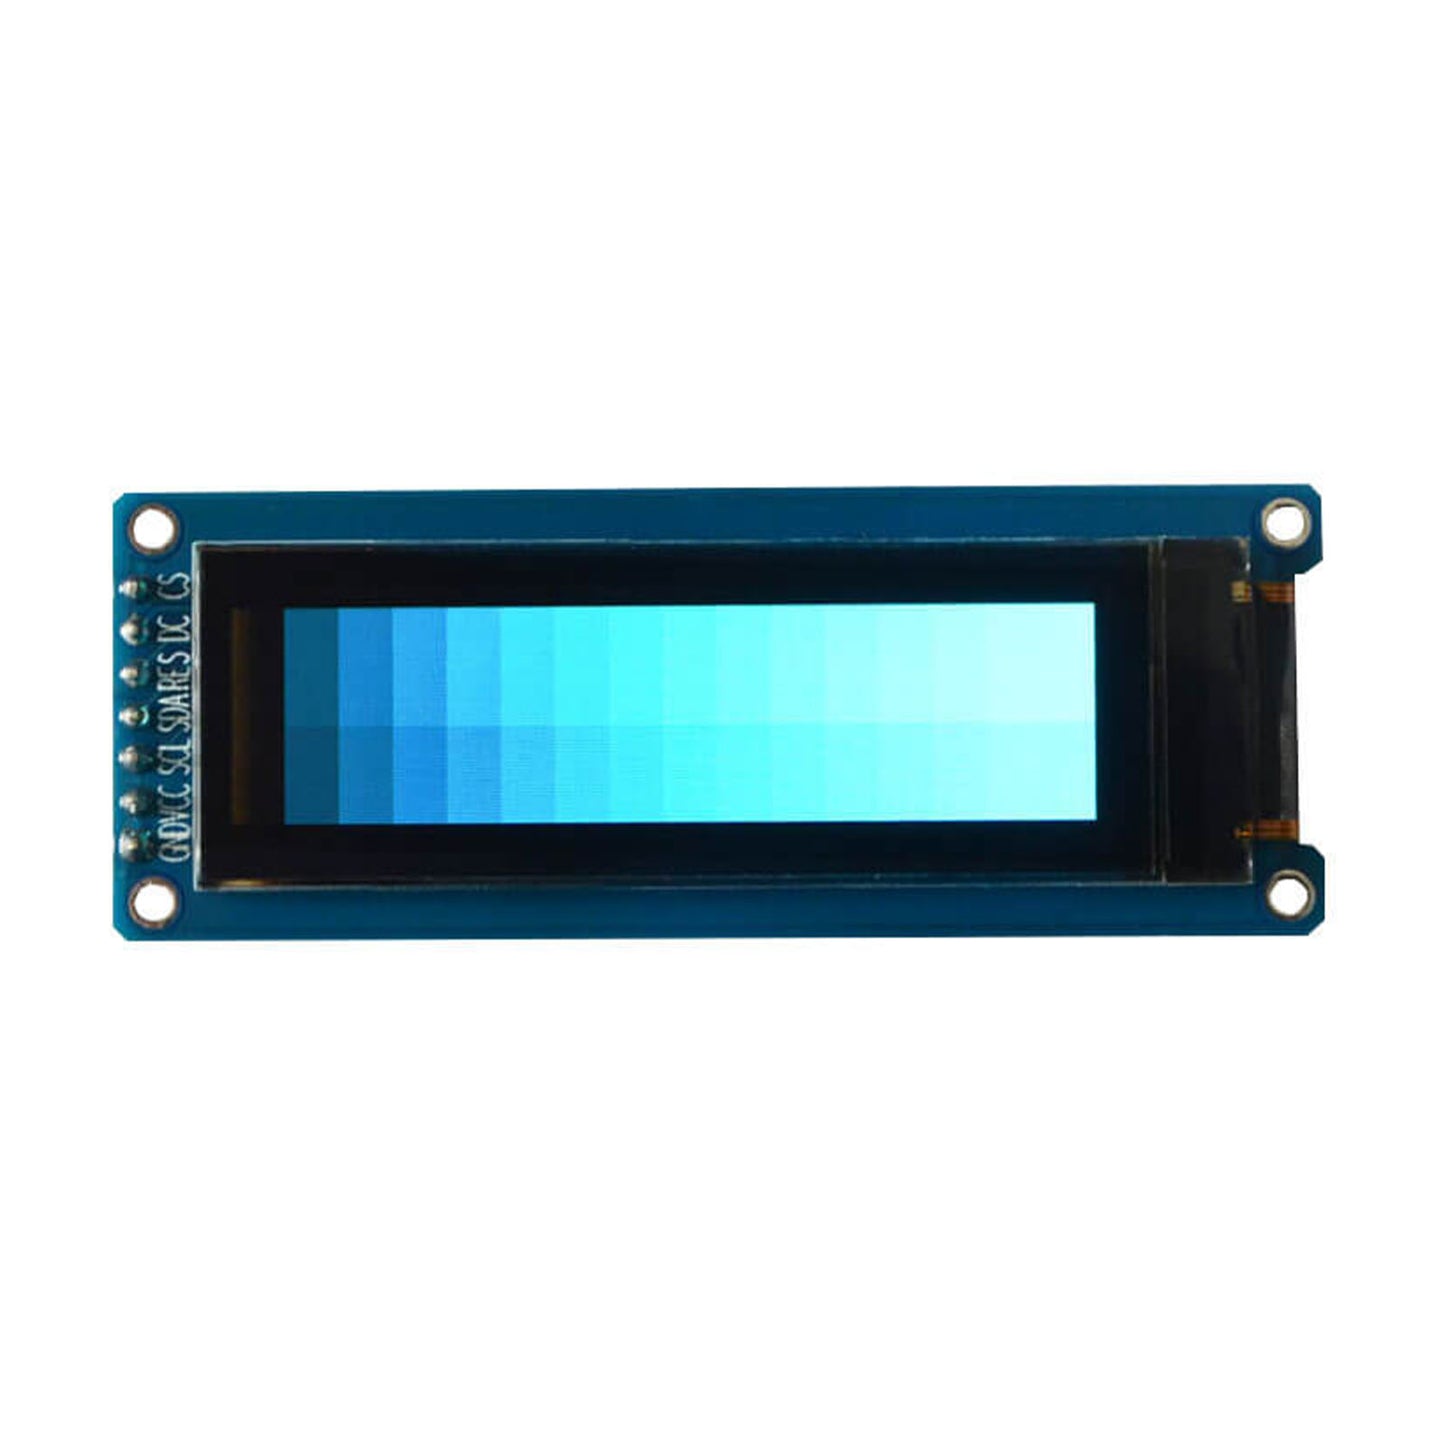 2.08 inch 256x64 monochrome OLED graphic display module with SPI interface